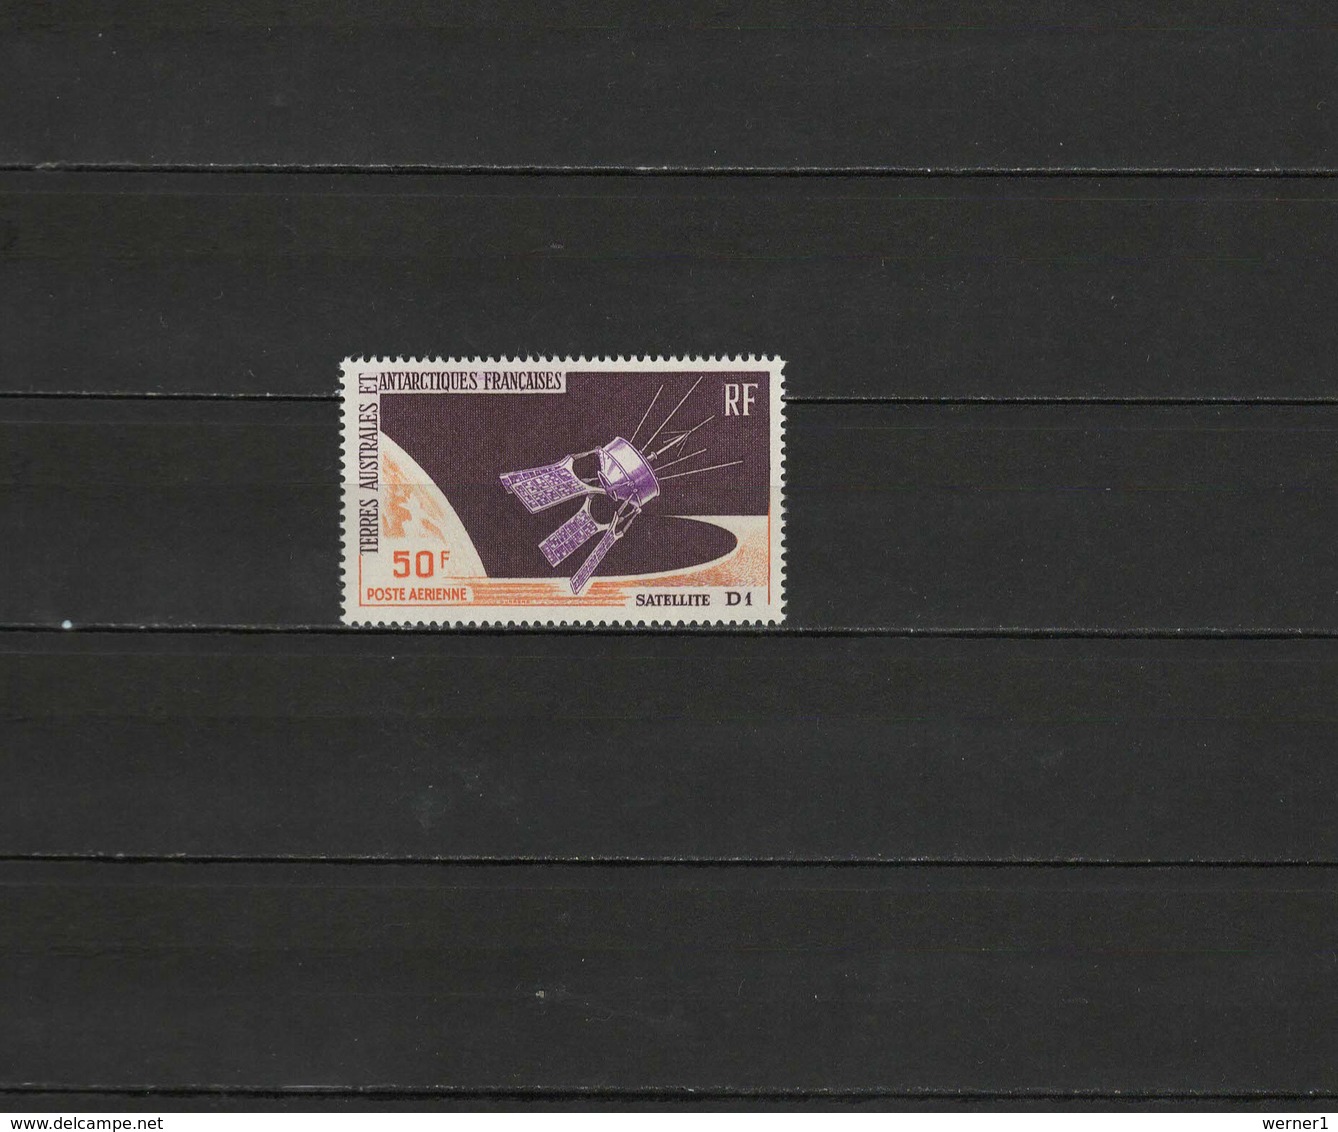 FSAT French Antarctic Territory 1966 Space Stamp MNH -scarce- - Océanie